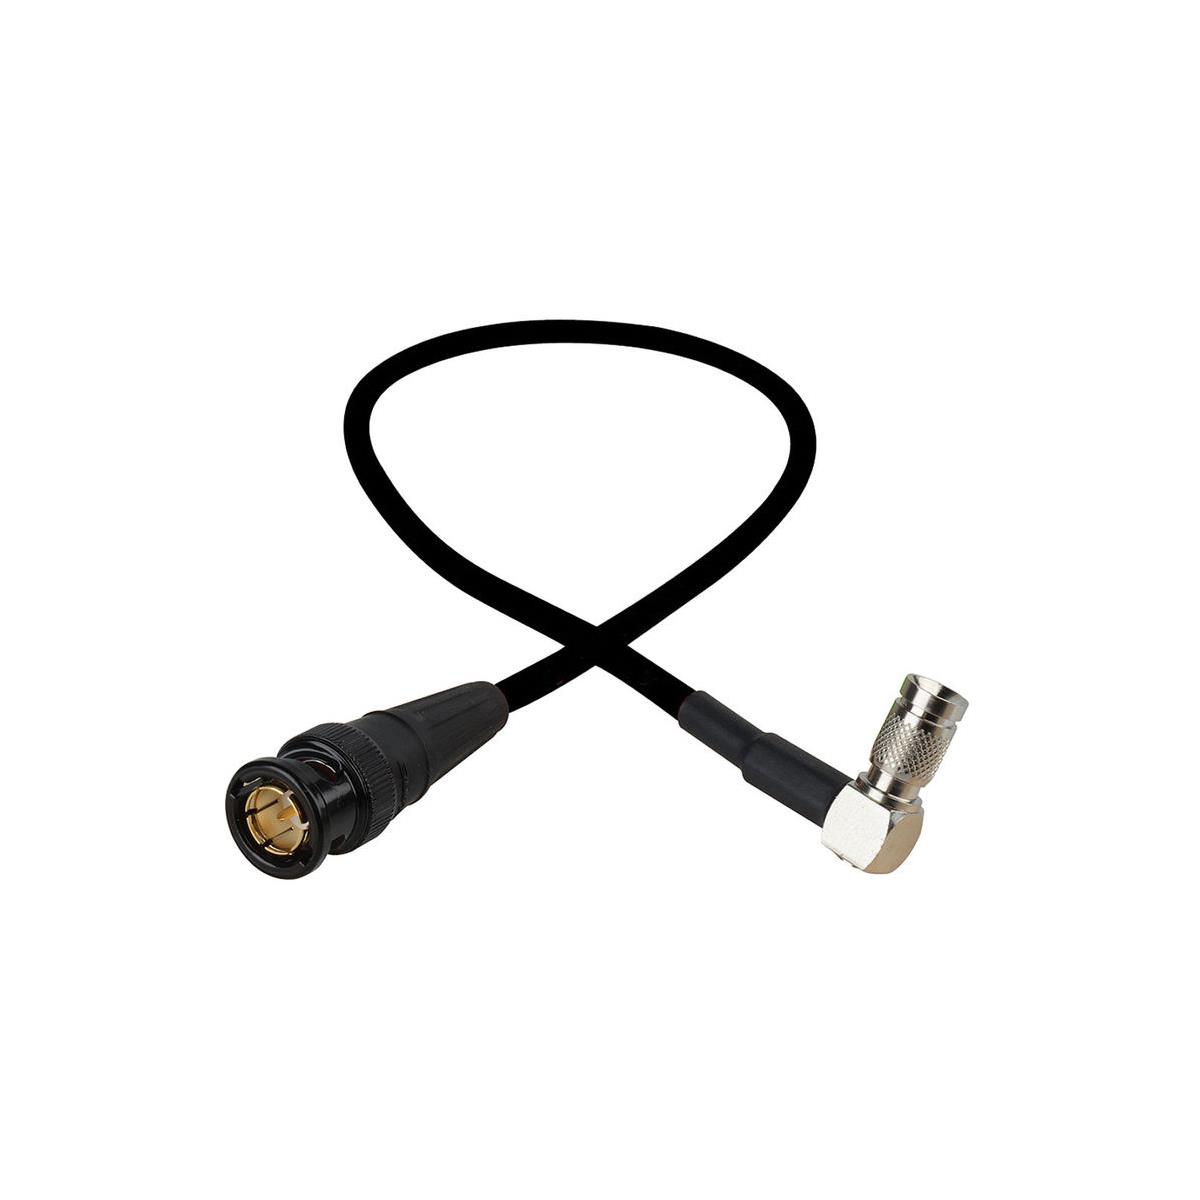 

Laird 1' 3G SDI Right Angle DIN 1.0/2.3 to BNC Adapter Cable, Black